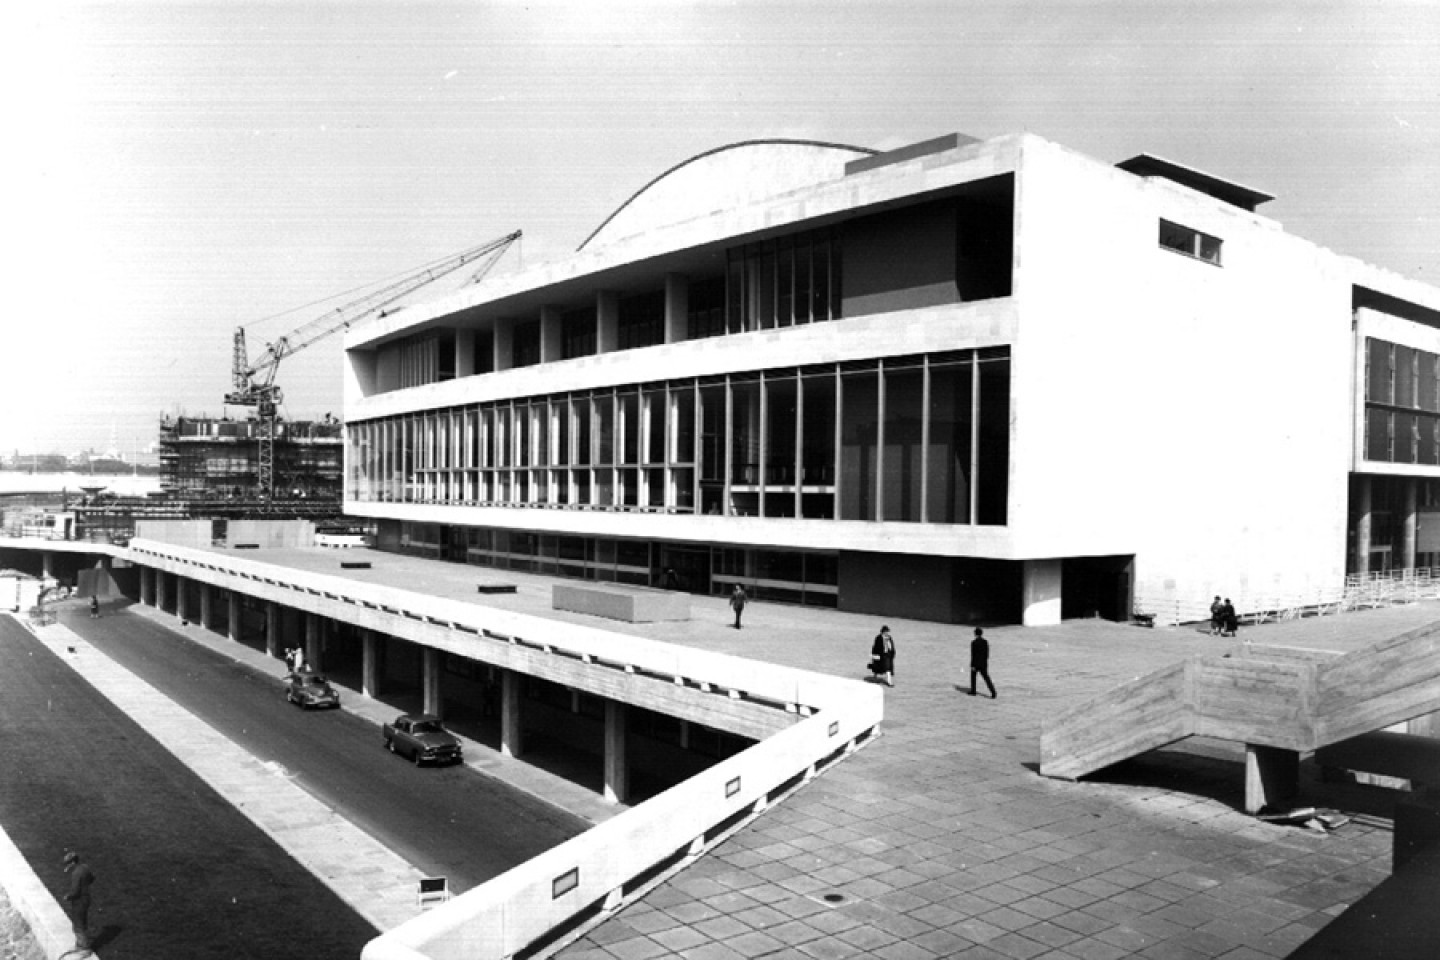  © Royal Festival Hall in the 1950s